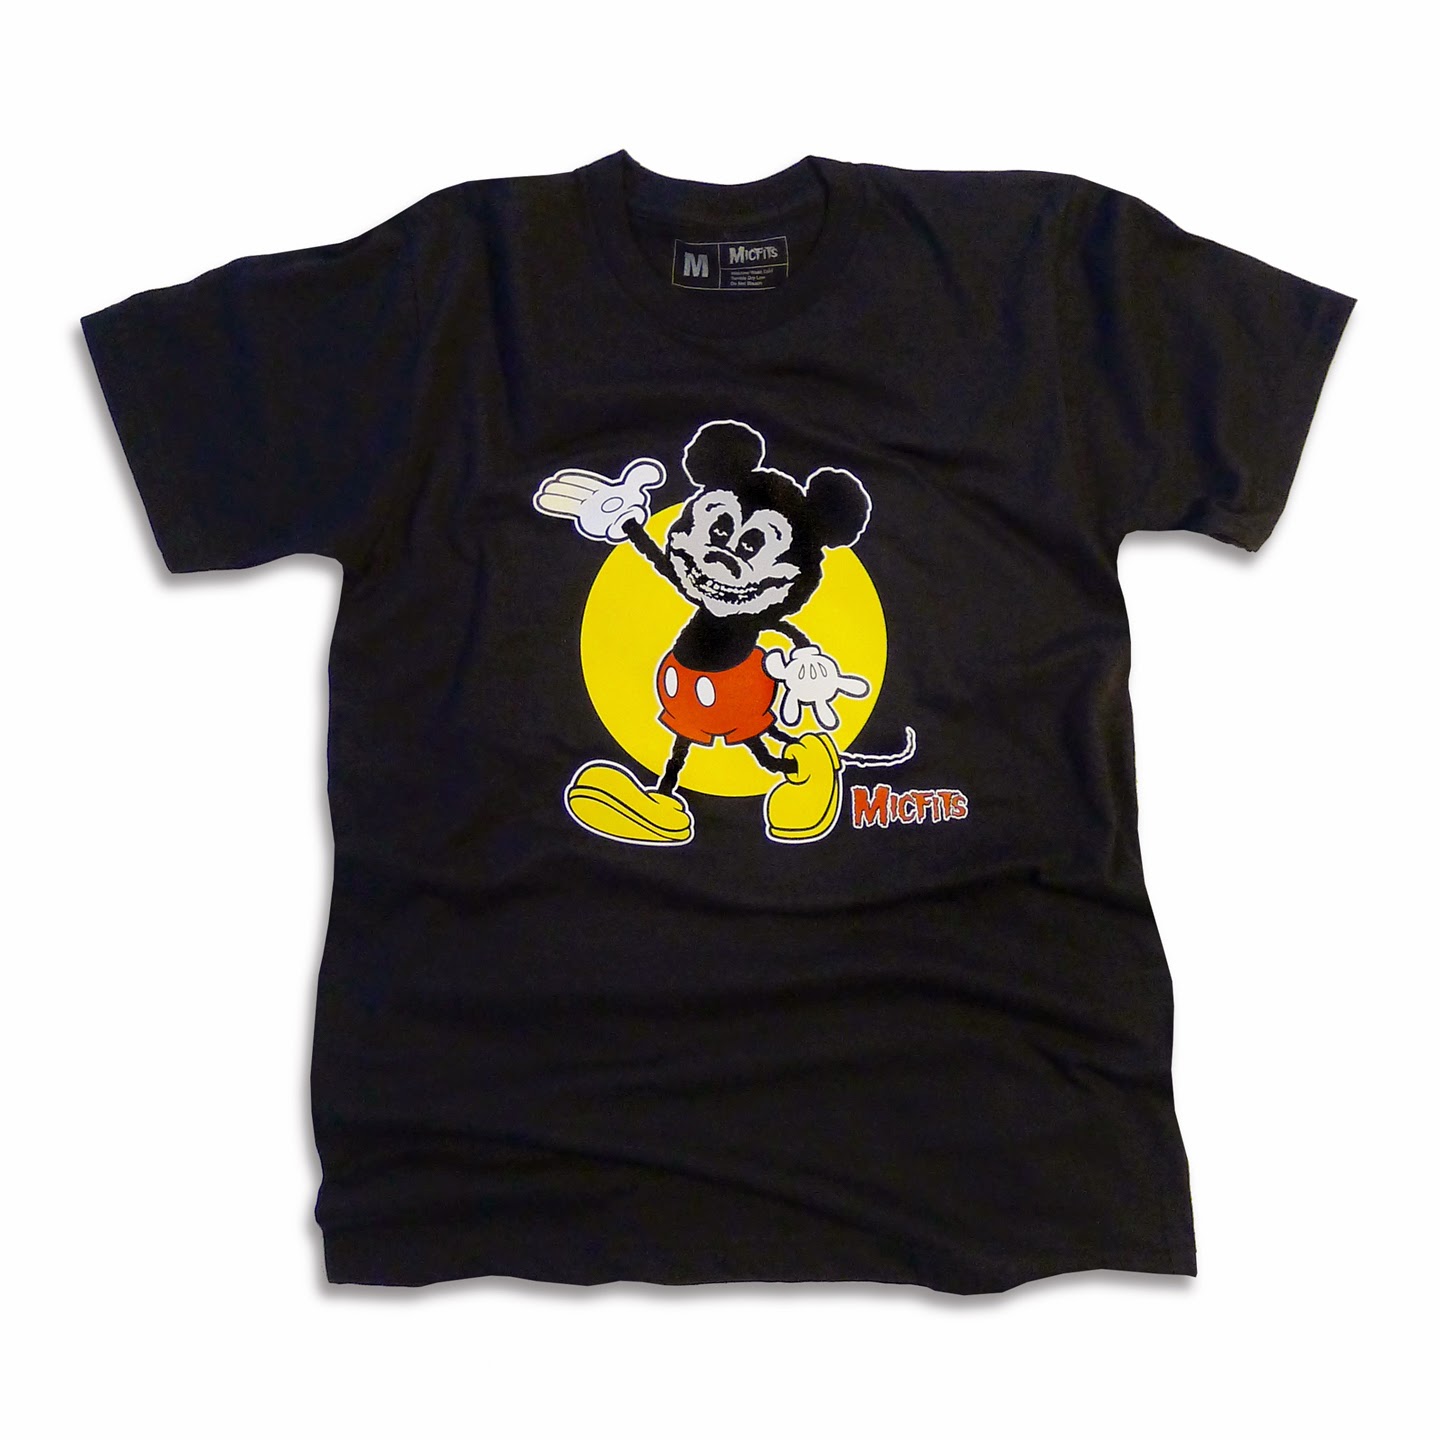 Micfits Social Club Disney Mickey Mouse T-Shirt by Chamuco’s Studios